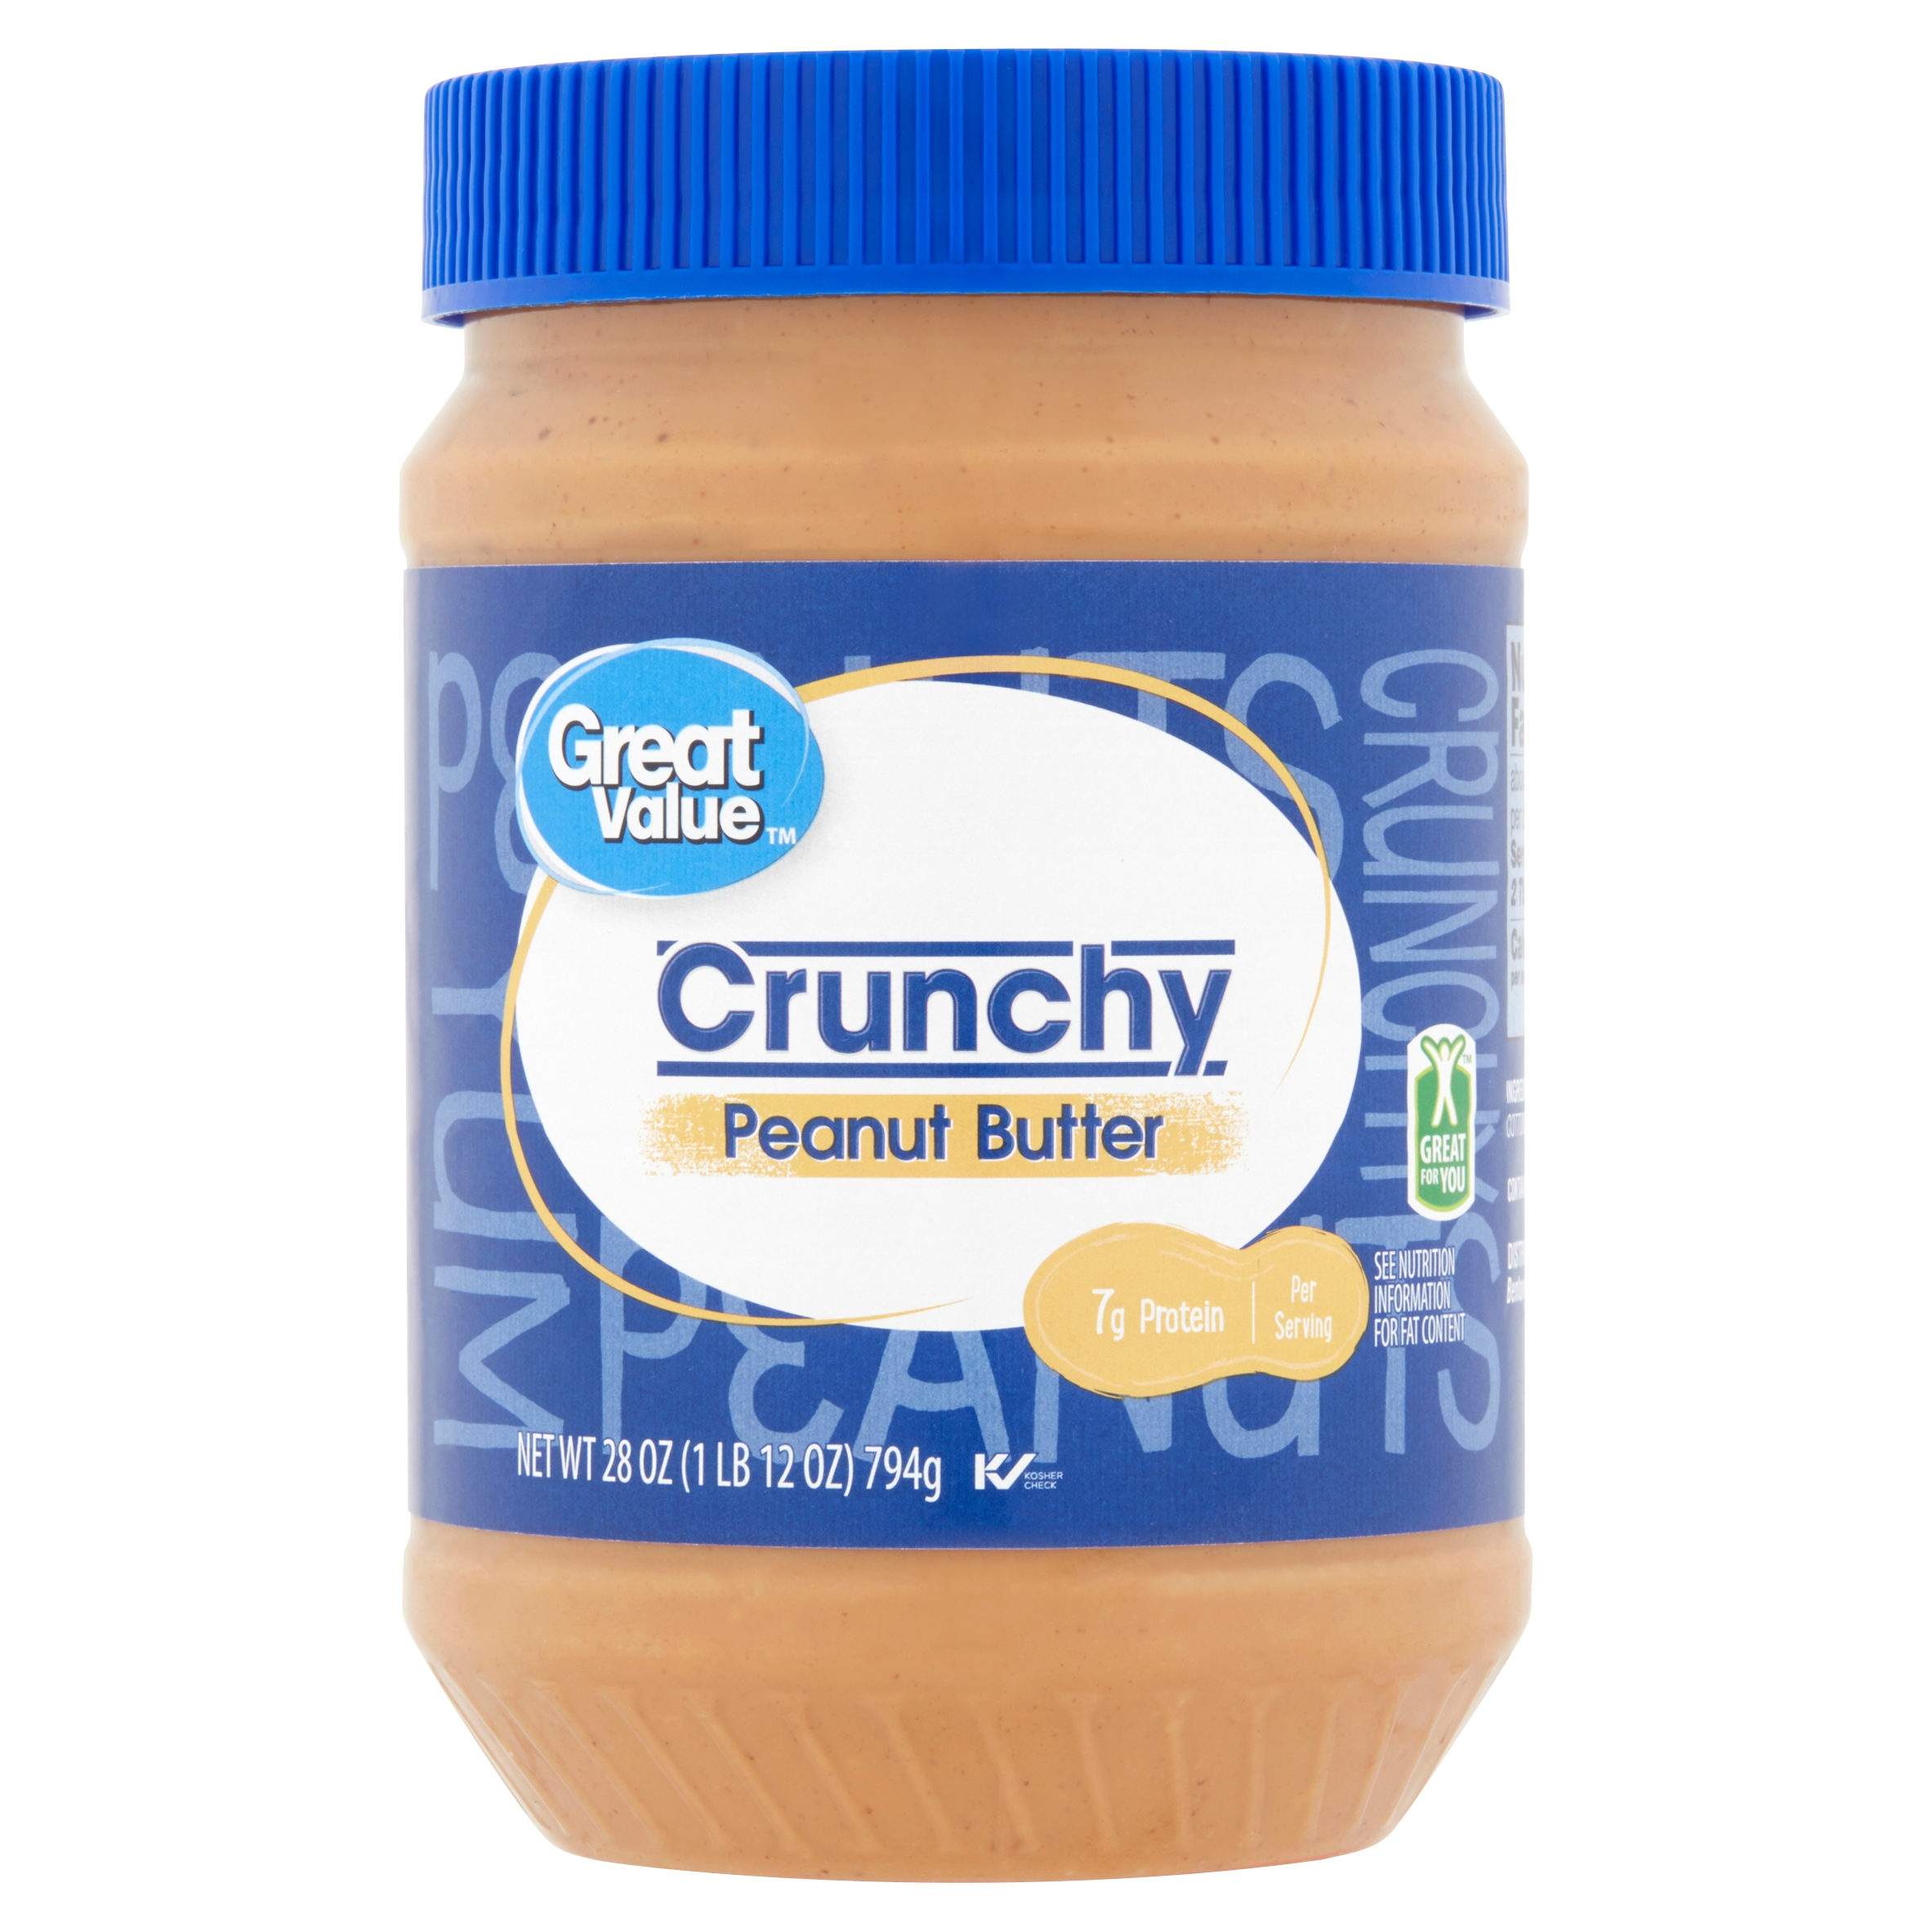 Great Value Crunchy Peanut Butter, 28 Ounces - image 3 of 8